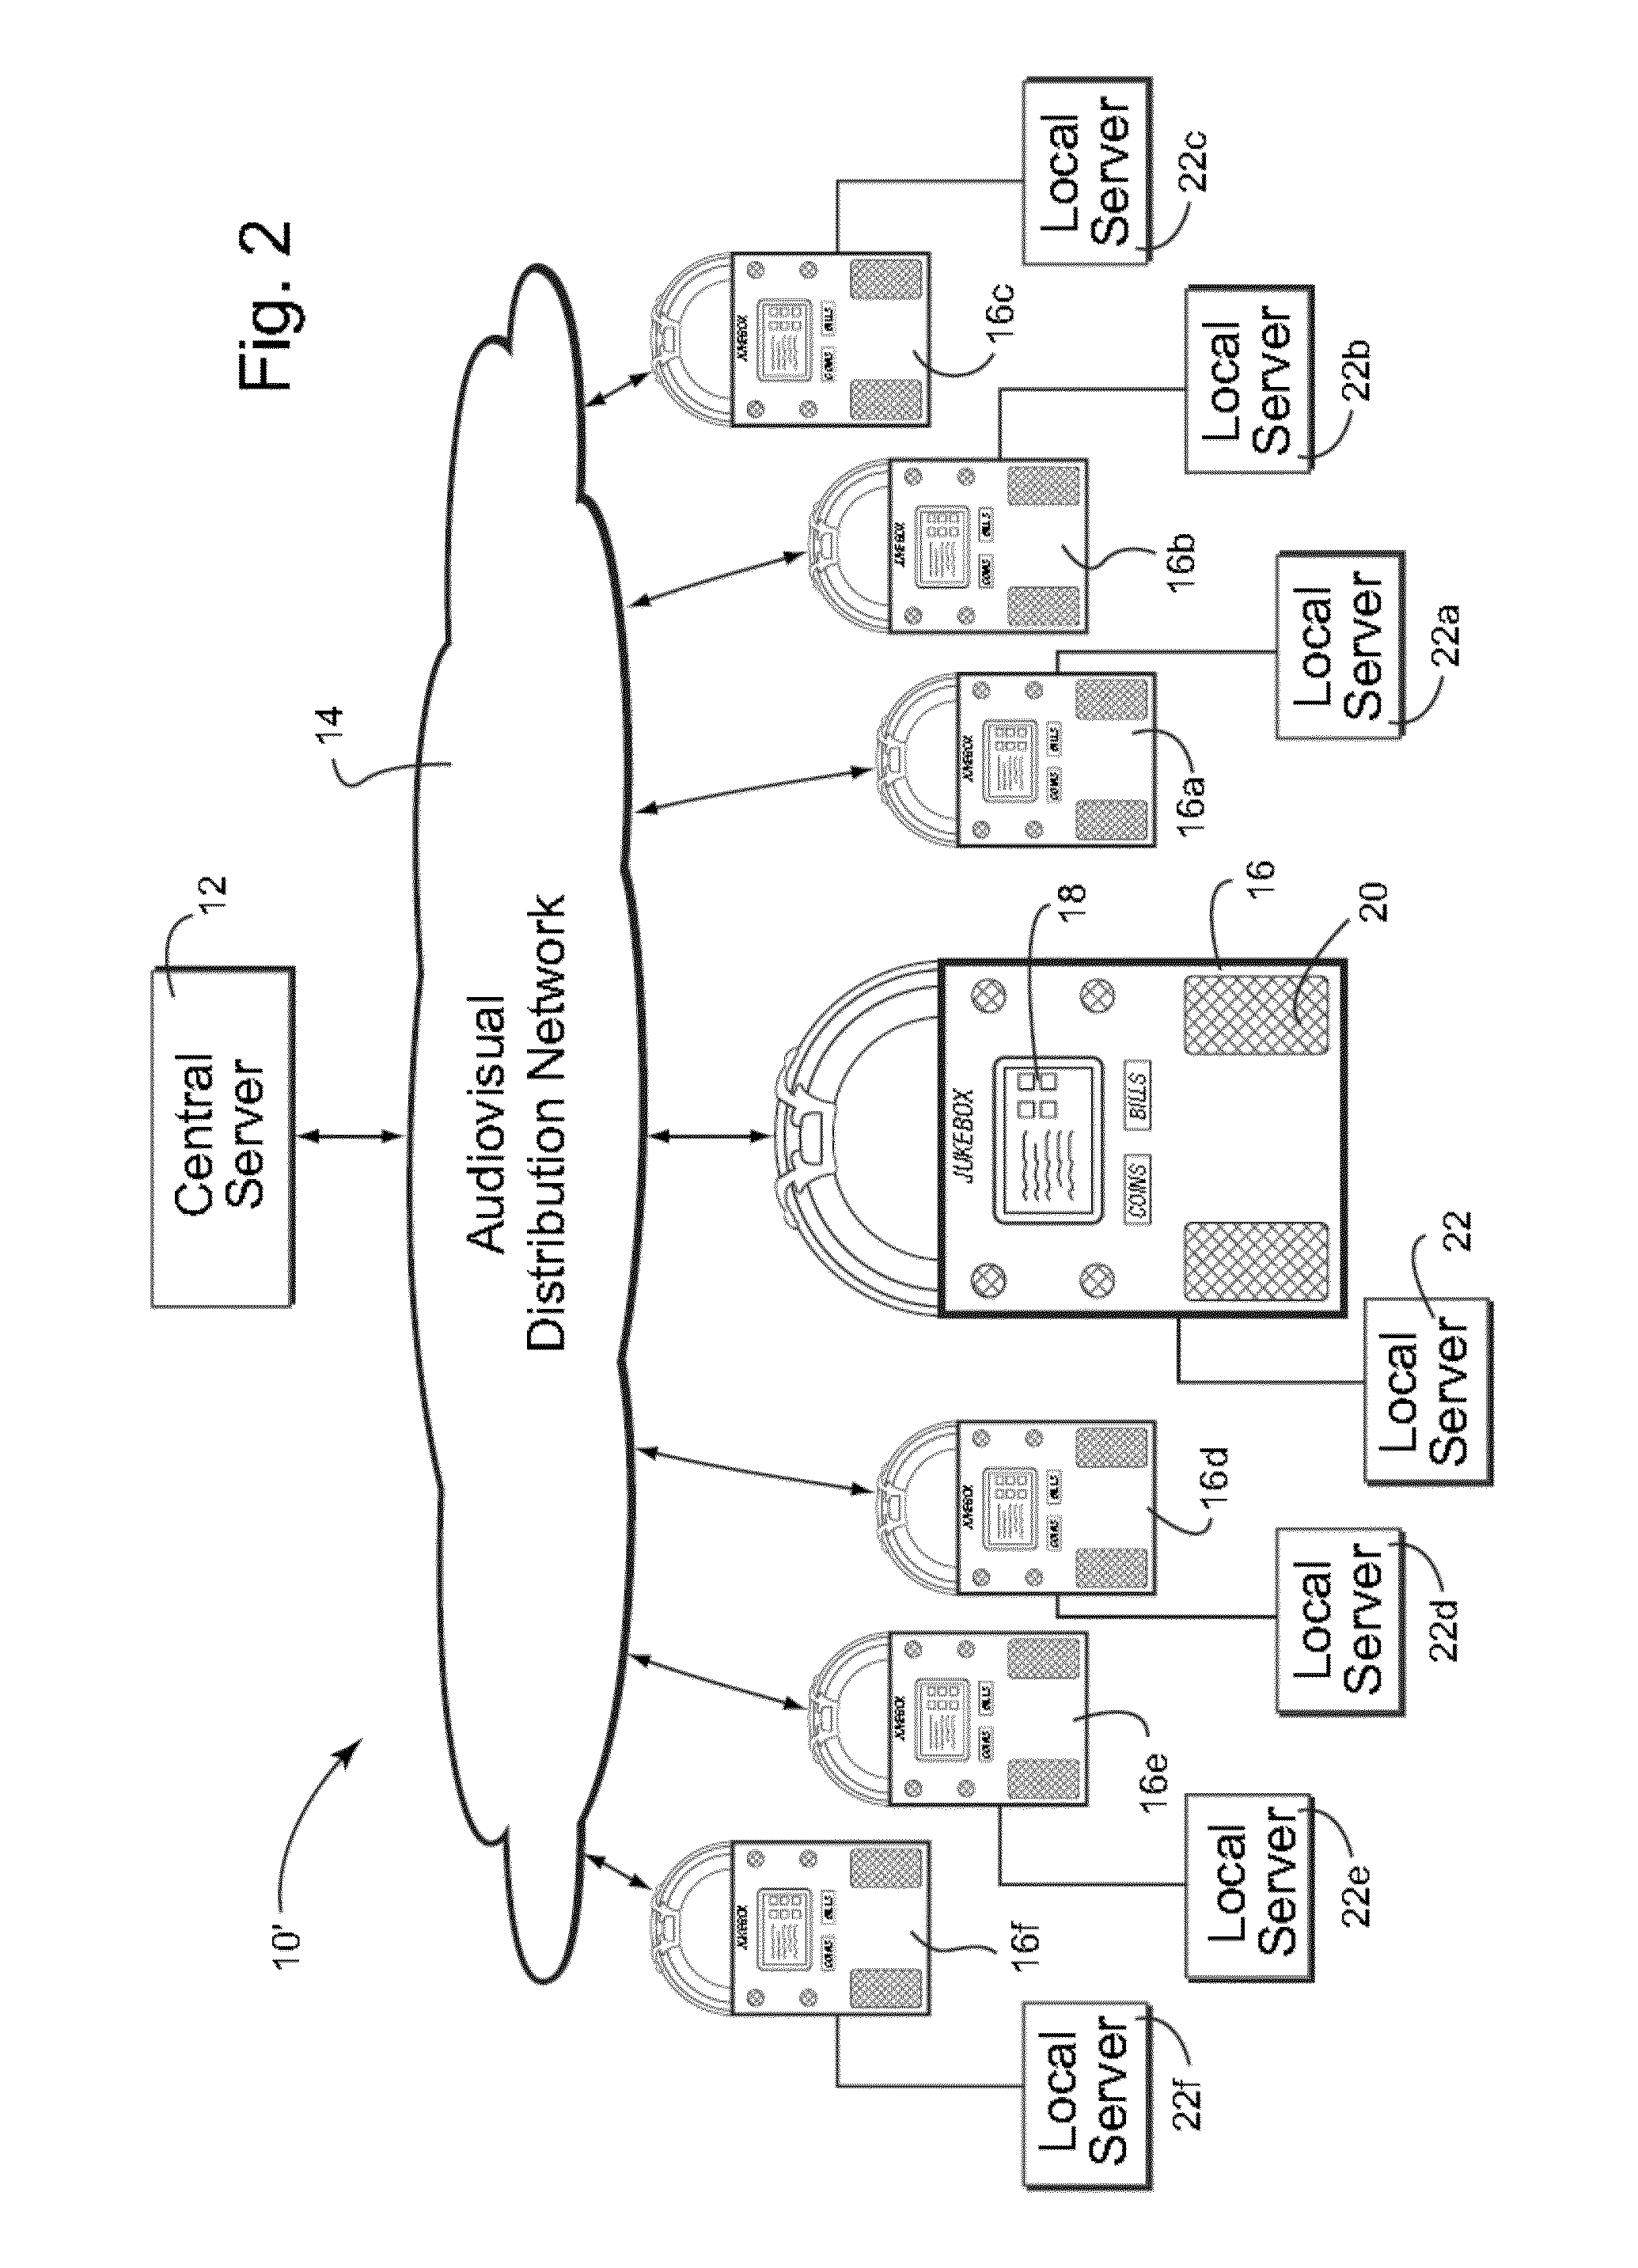 Digital jukebox device with improved user interfaces, and associated methods